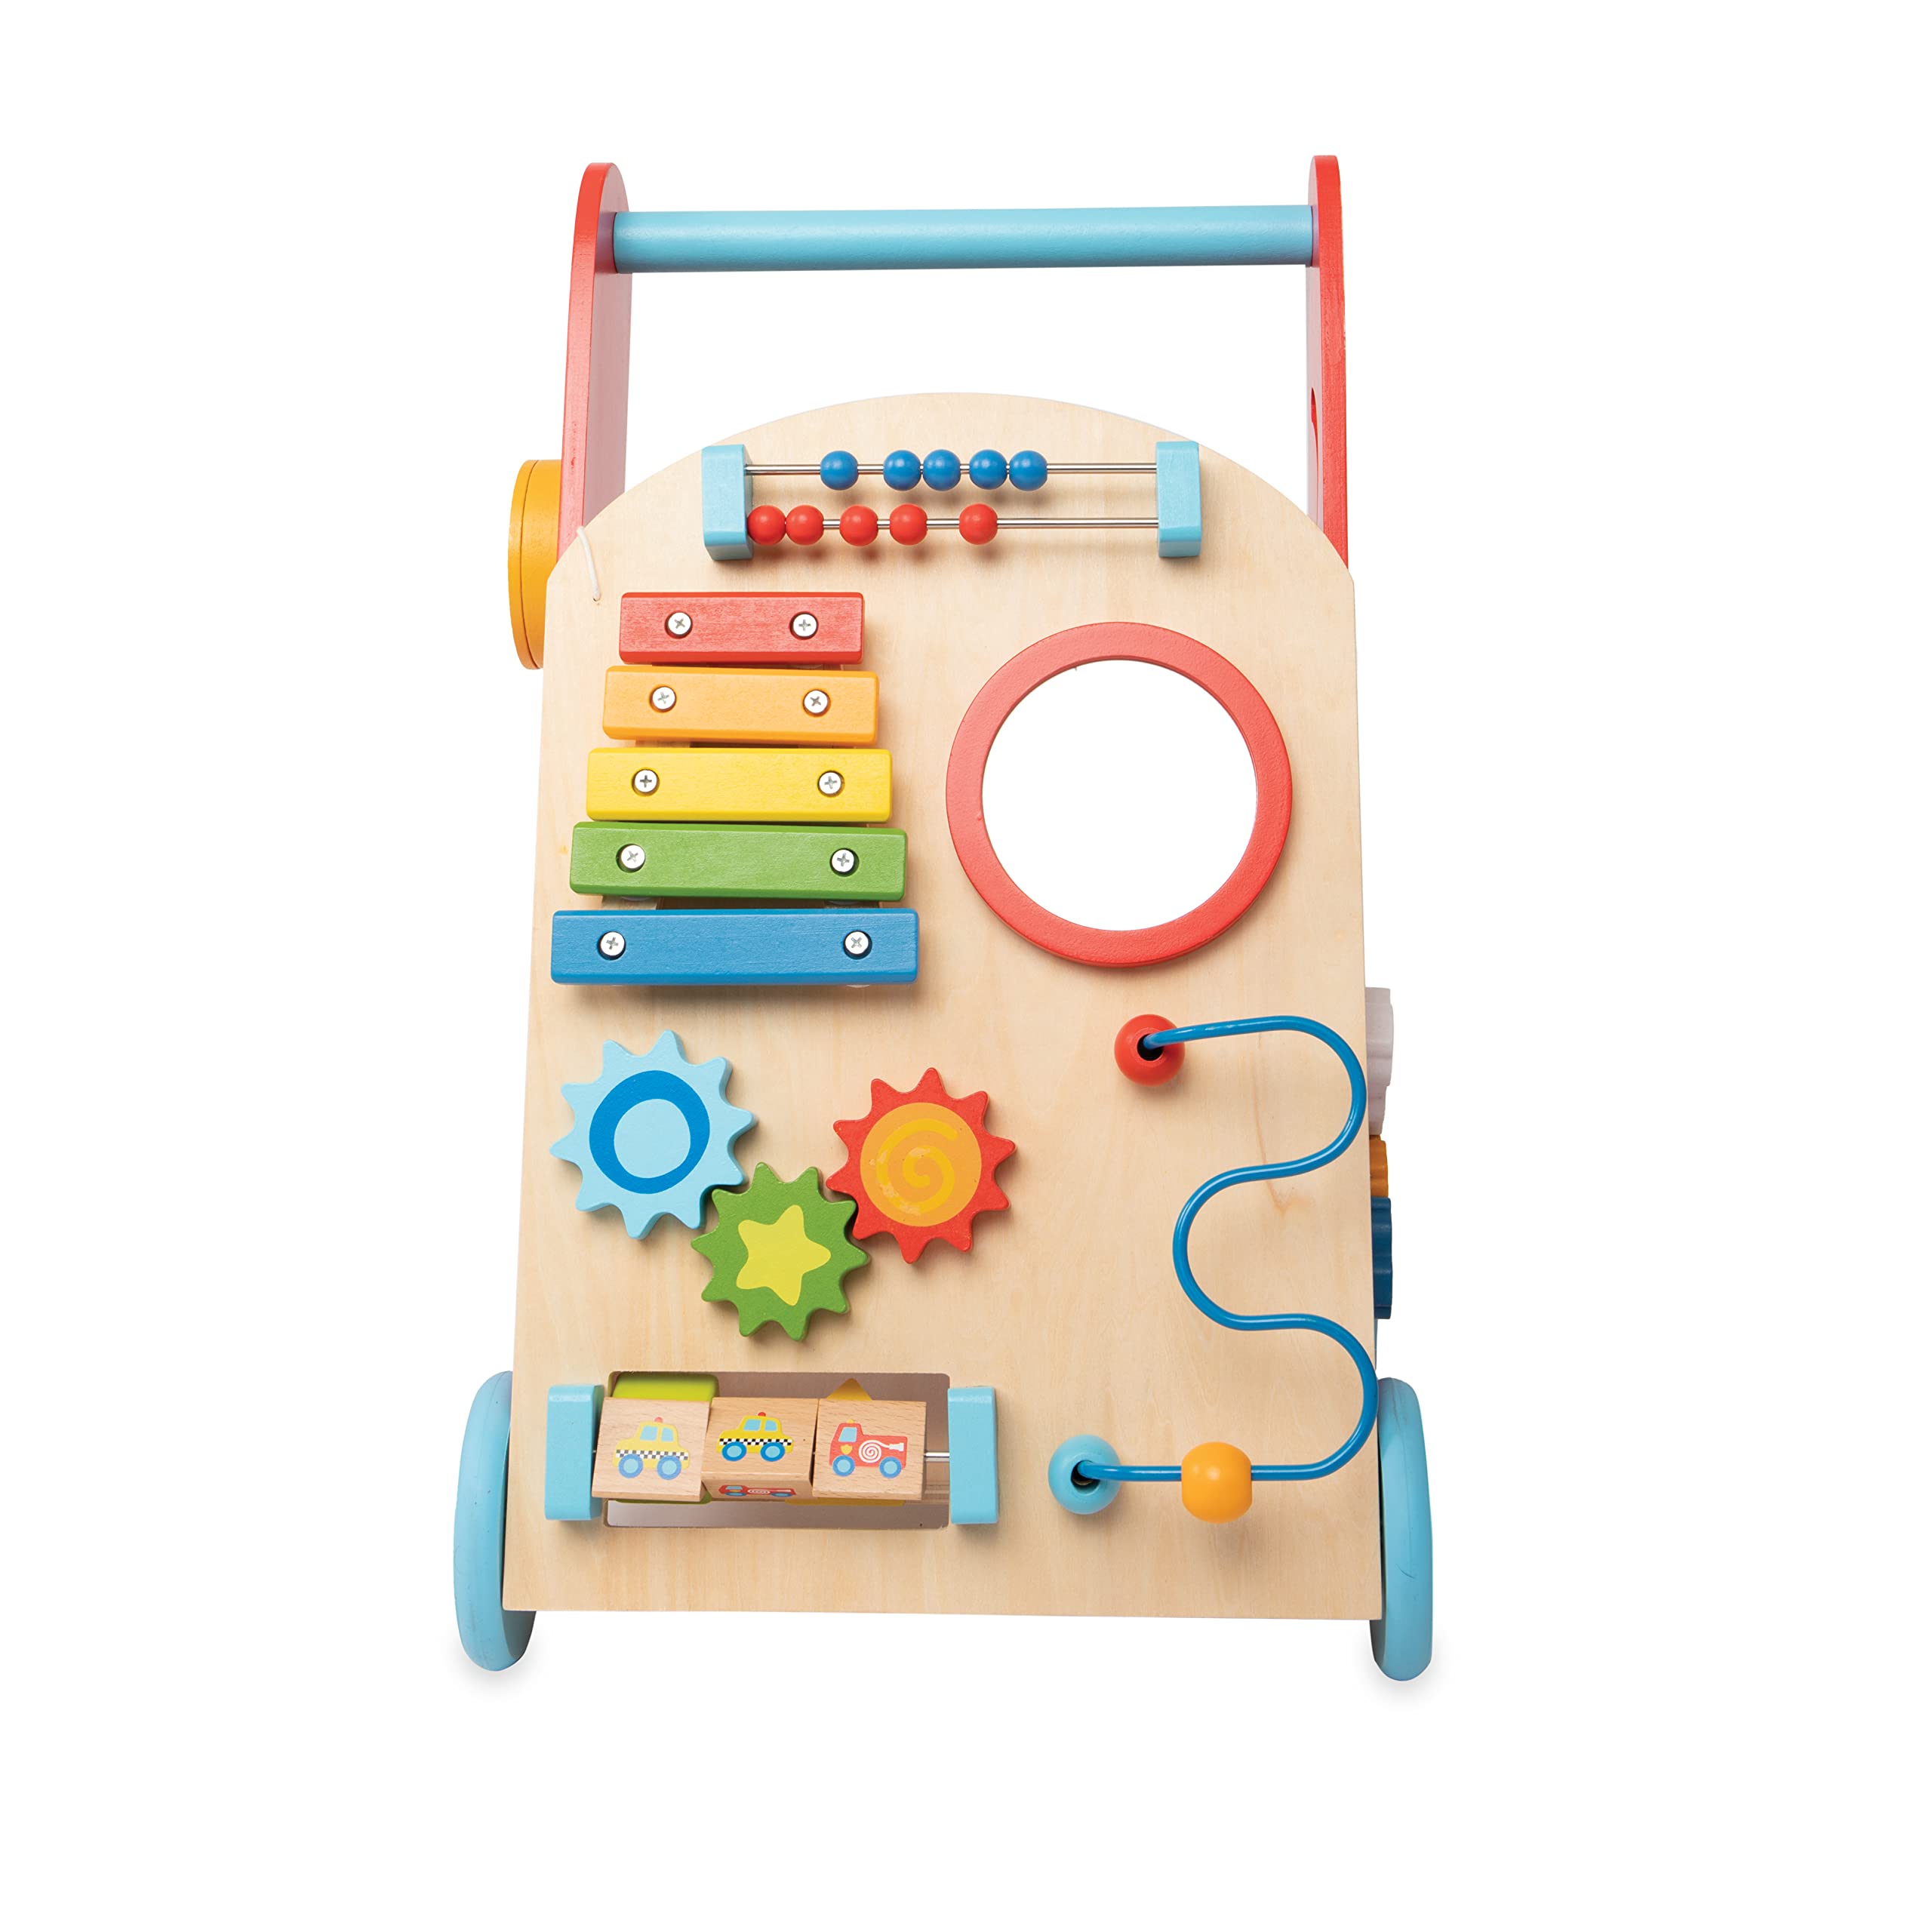 Nuby Wooden Baby Walker with Interactive Features for Early Development, Promotes Walking, Motor Skills, and Creativity